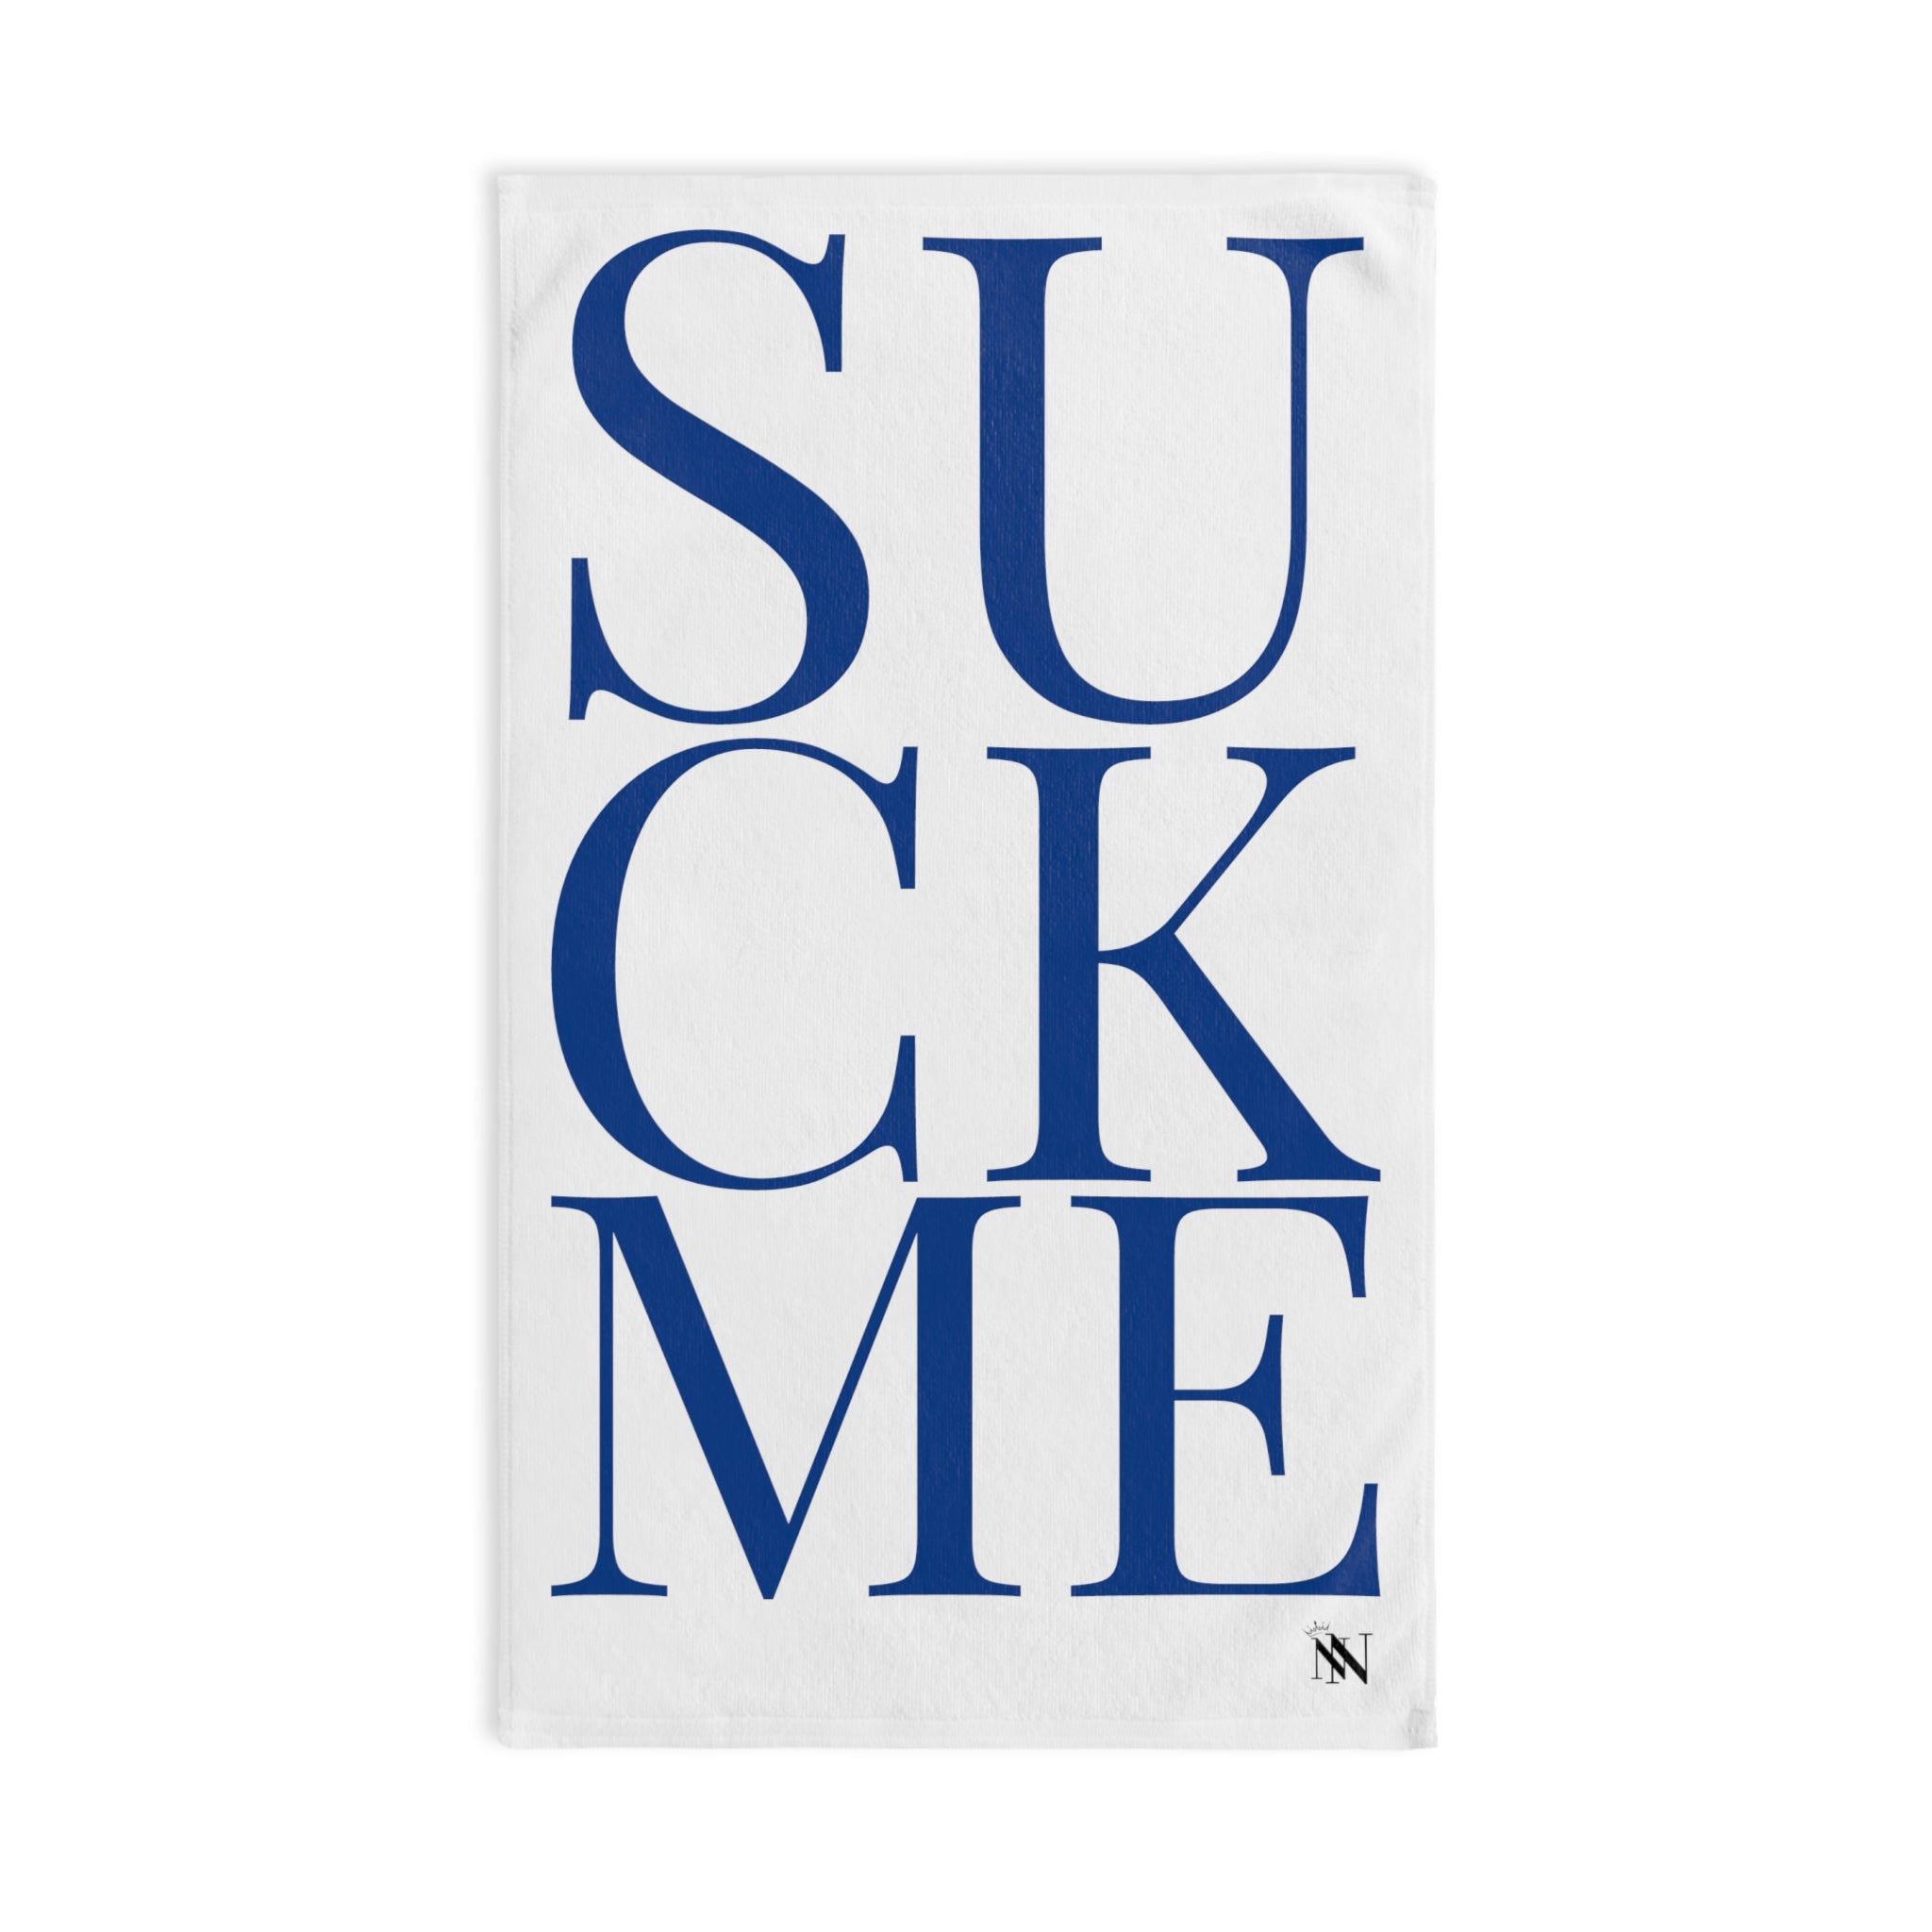 Suck Me Blue White | Funny Gifts for Men - Gifts for Him - Birthday Gifts for Men, Him, Her, Husband, Boyfriend, Girlfriend, New Couple Gifts, Fathers & Valentines Day Gifts, Christmas Gifts NECTAR NAPKINS